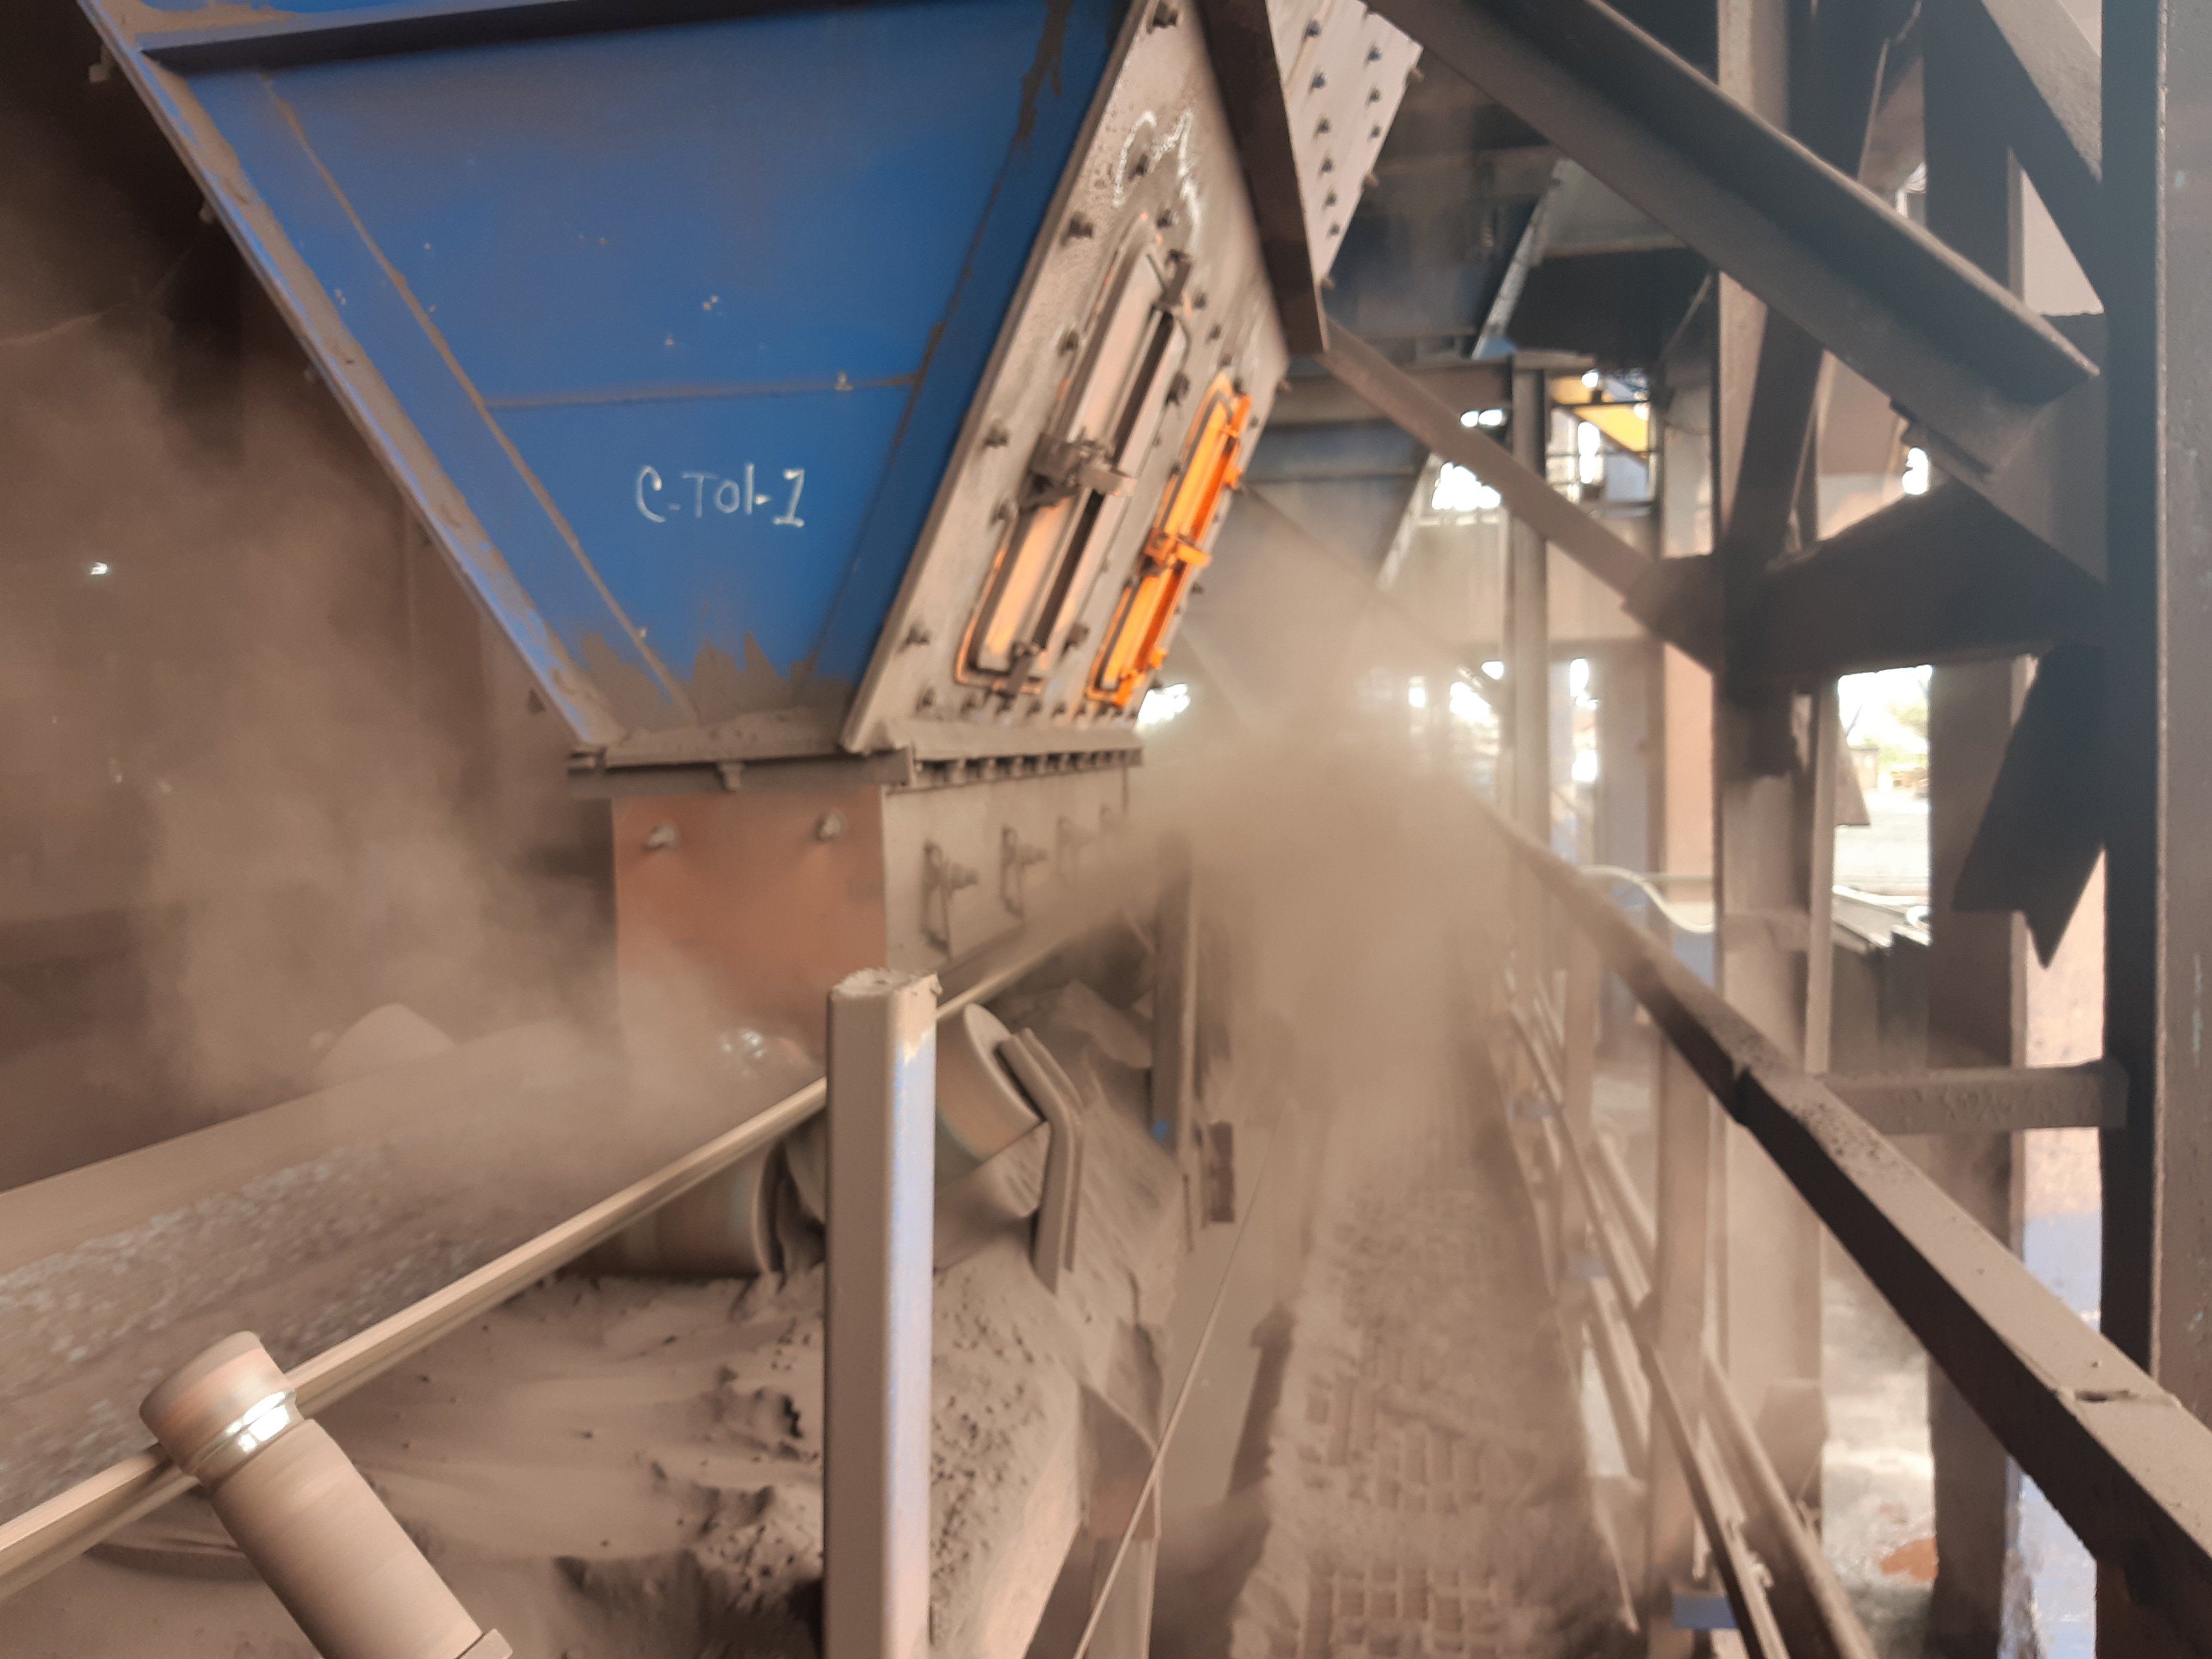 Steps to mitigate dust at transfer points should be taken